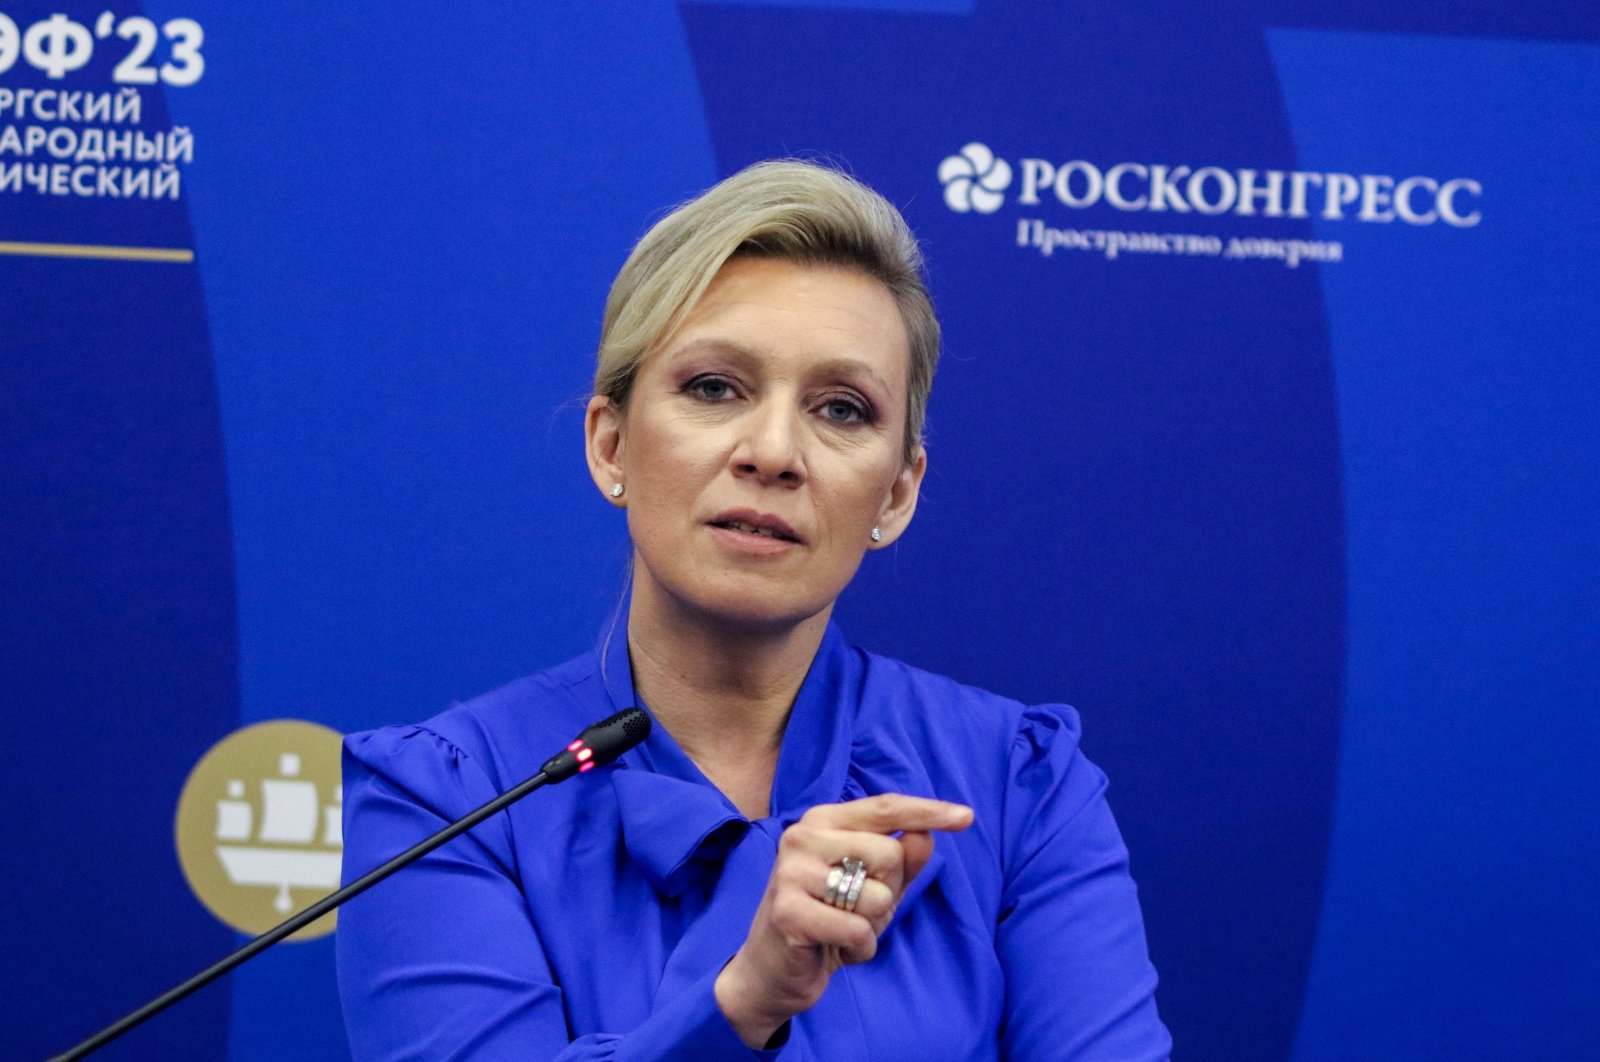 Russian Foreign Ministry spokeswoman Maria Zakharova attends a session on New World  New Opportunities: How to Advance Russia Positions and Approaches Abroad in the framework of the St. Petersburg International Economic Forum 2023. (Reuters File Photo)